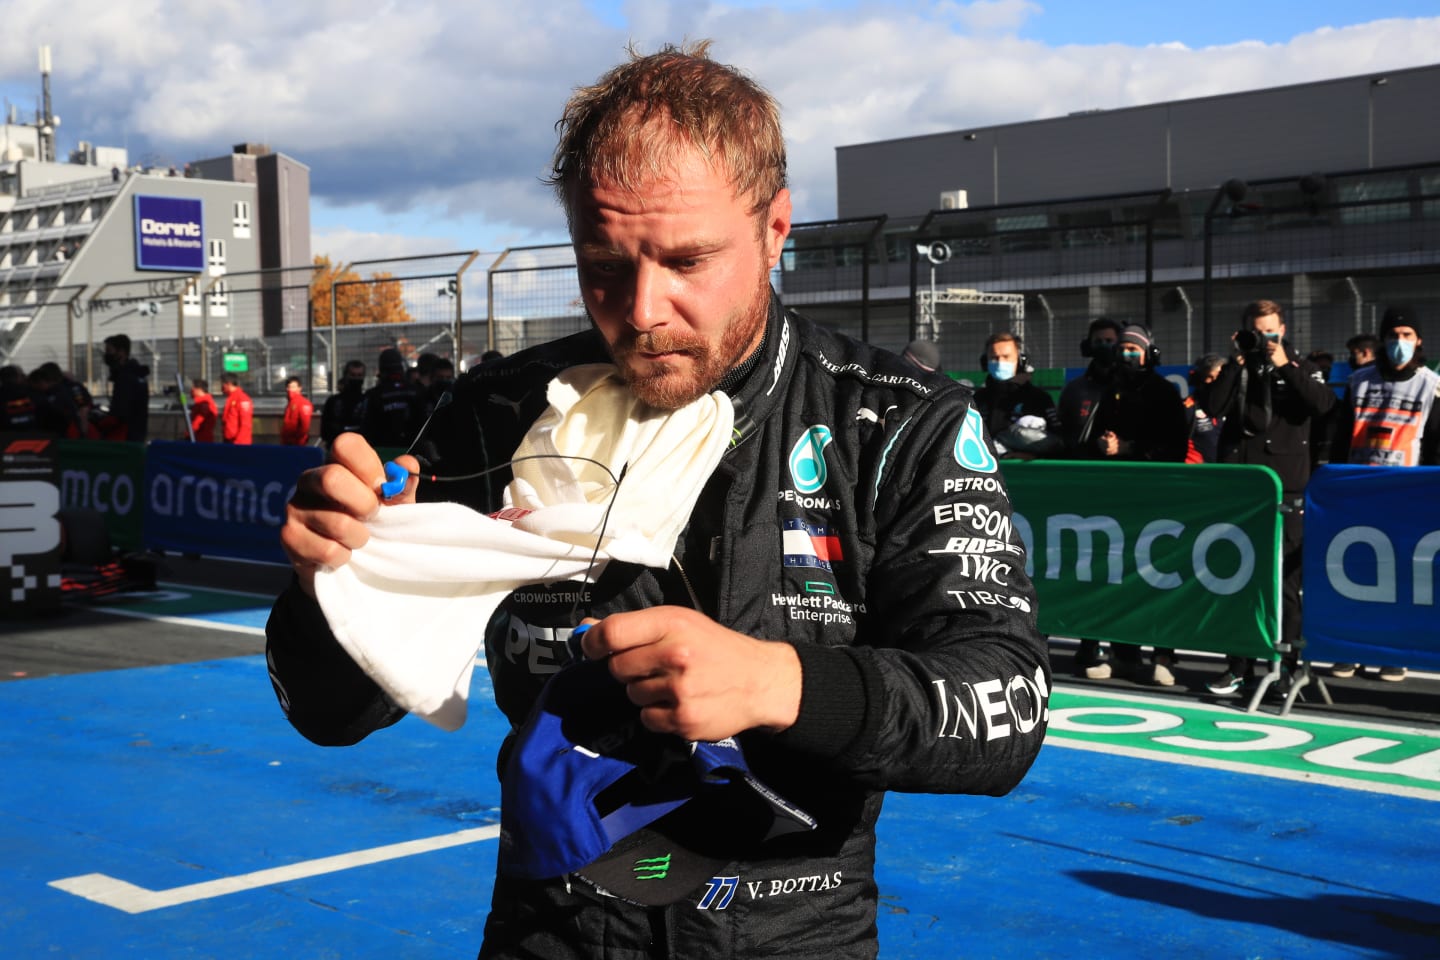 NUERBURG, GERMANY - OCTOBER 10: Pole position qualifier Valtteri Bottas of Finland and Mercedes GP removes his balaclava in parc ferme during qualifying ahead of the F1 Eifel Grand Prix at Nuerburgring on October 10, 2020 in Nuerburg, Germany. (Photo by Wolfgang Rattay - Pool/Getty Images)